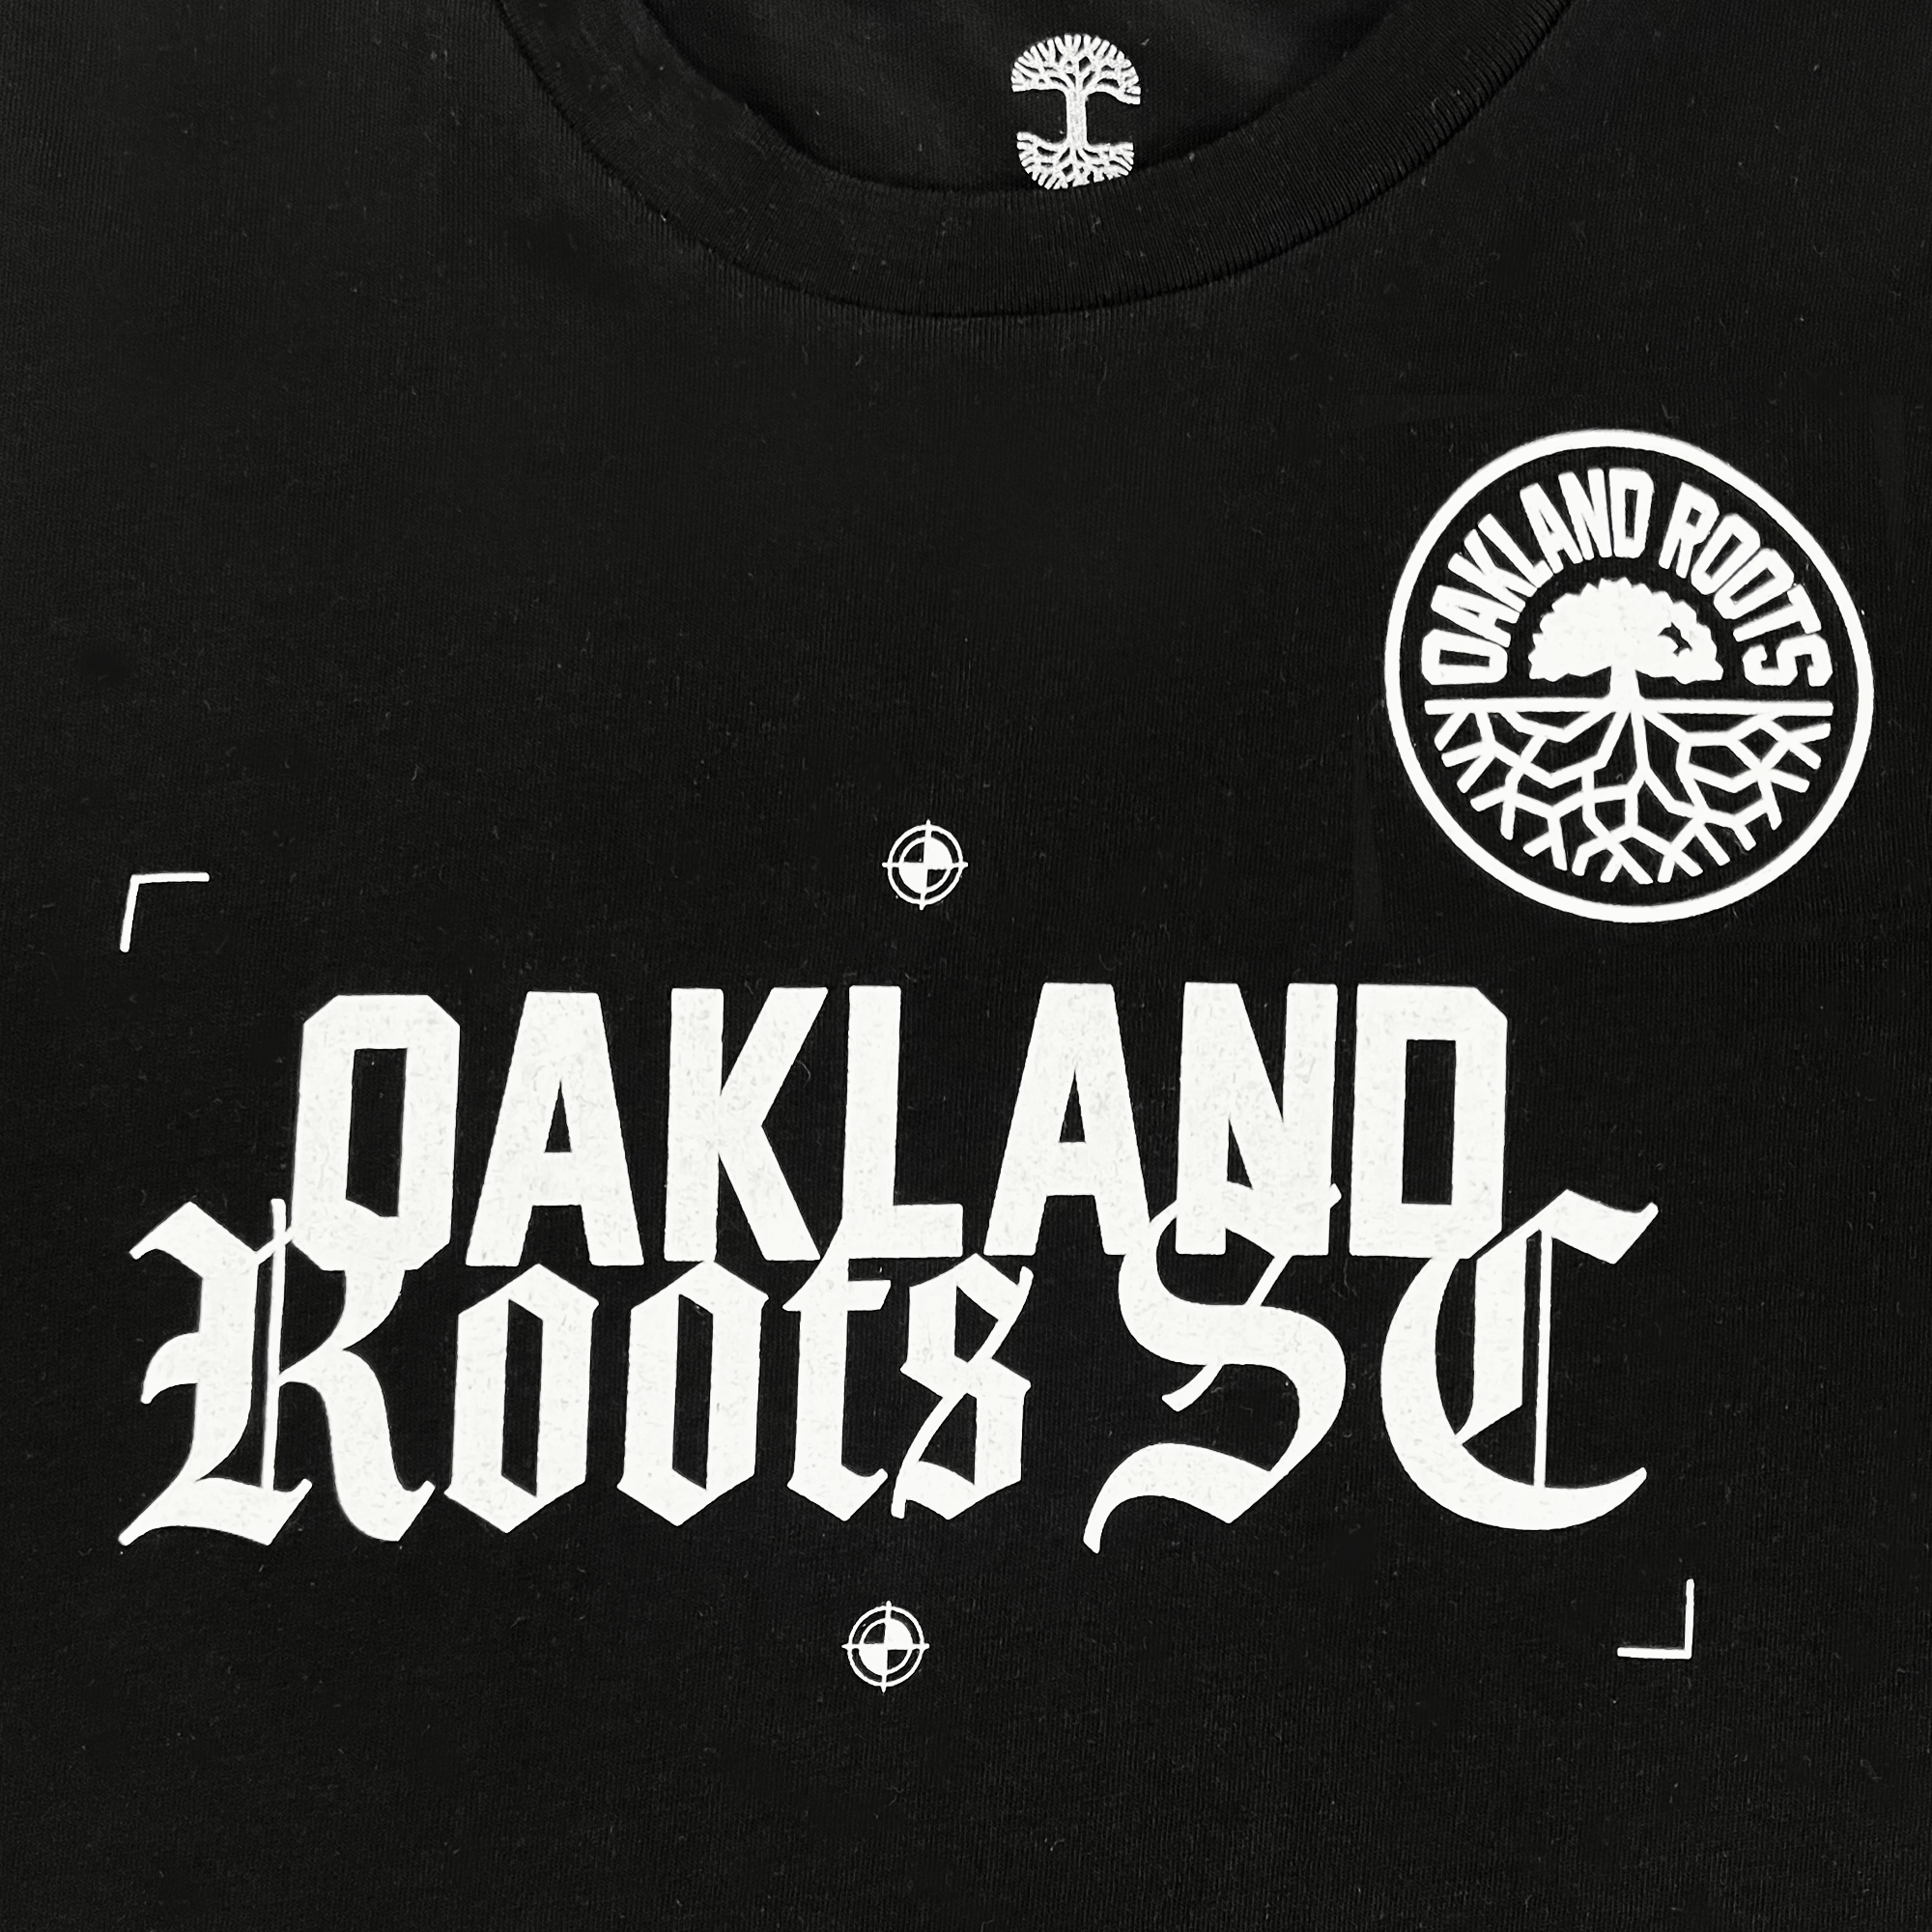 Close-up of white OAKLAND ROOTS SC wordmark in old-time font and circle logo on the chest of a black t-shirt.